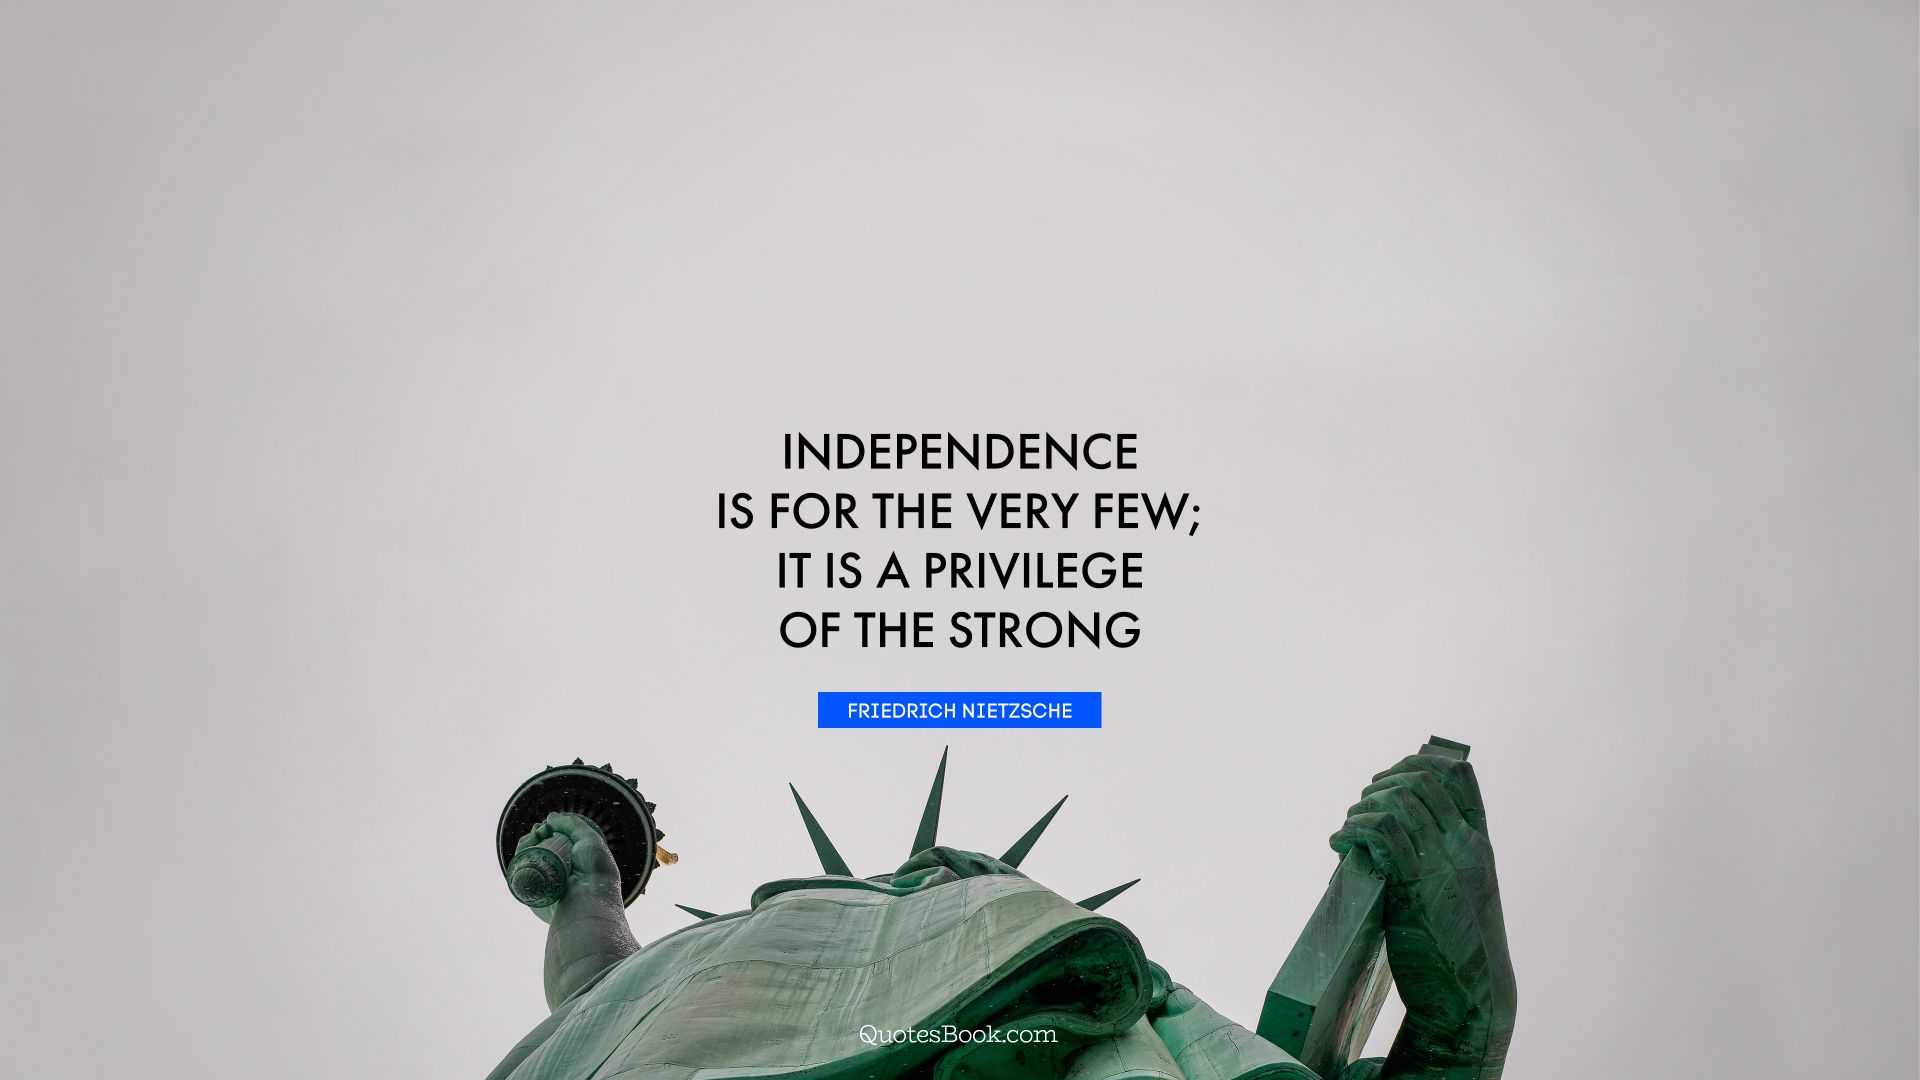 Independence is for the very few; it is a privilege of the strong. - Quote by Friedrich Nietzsche